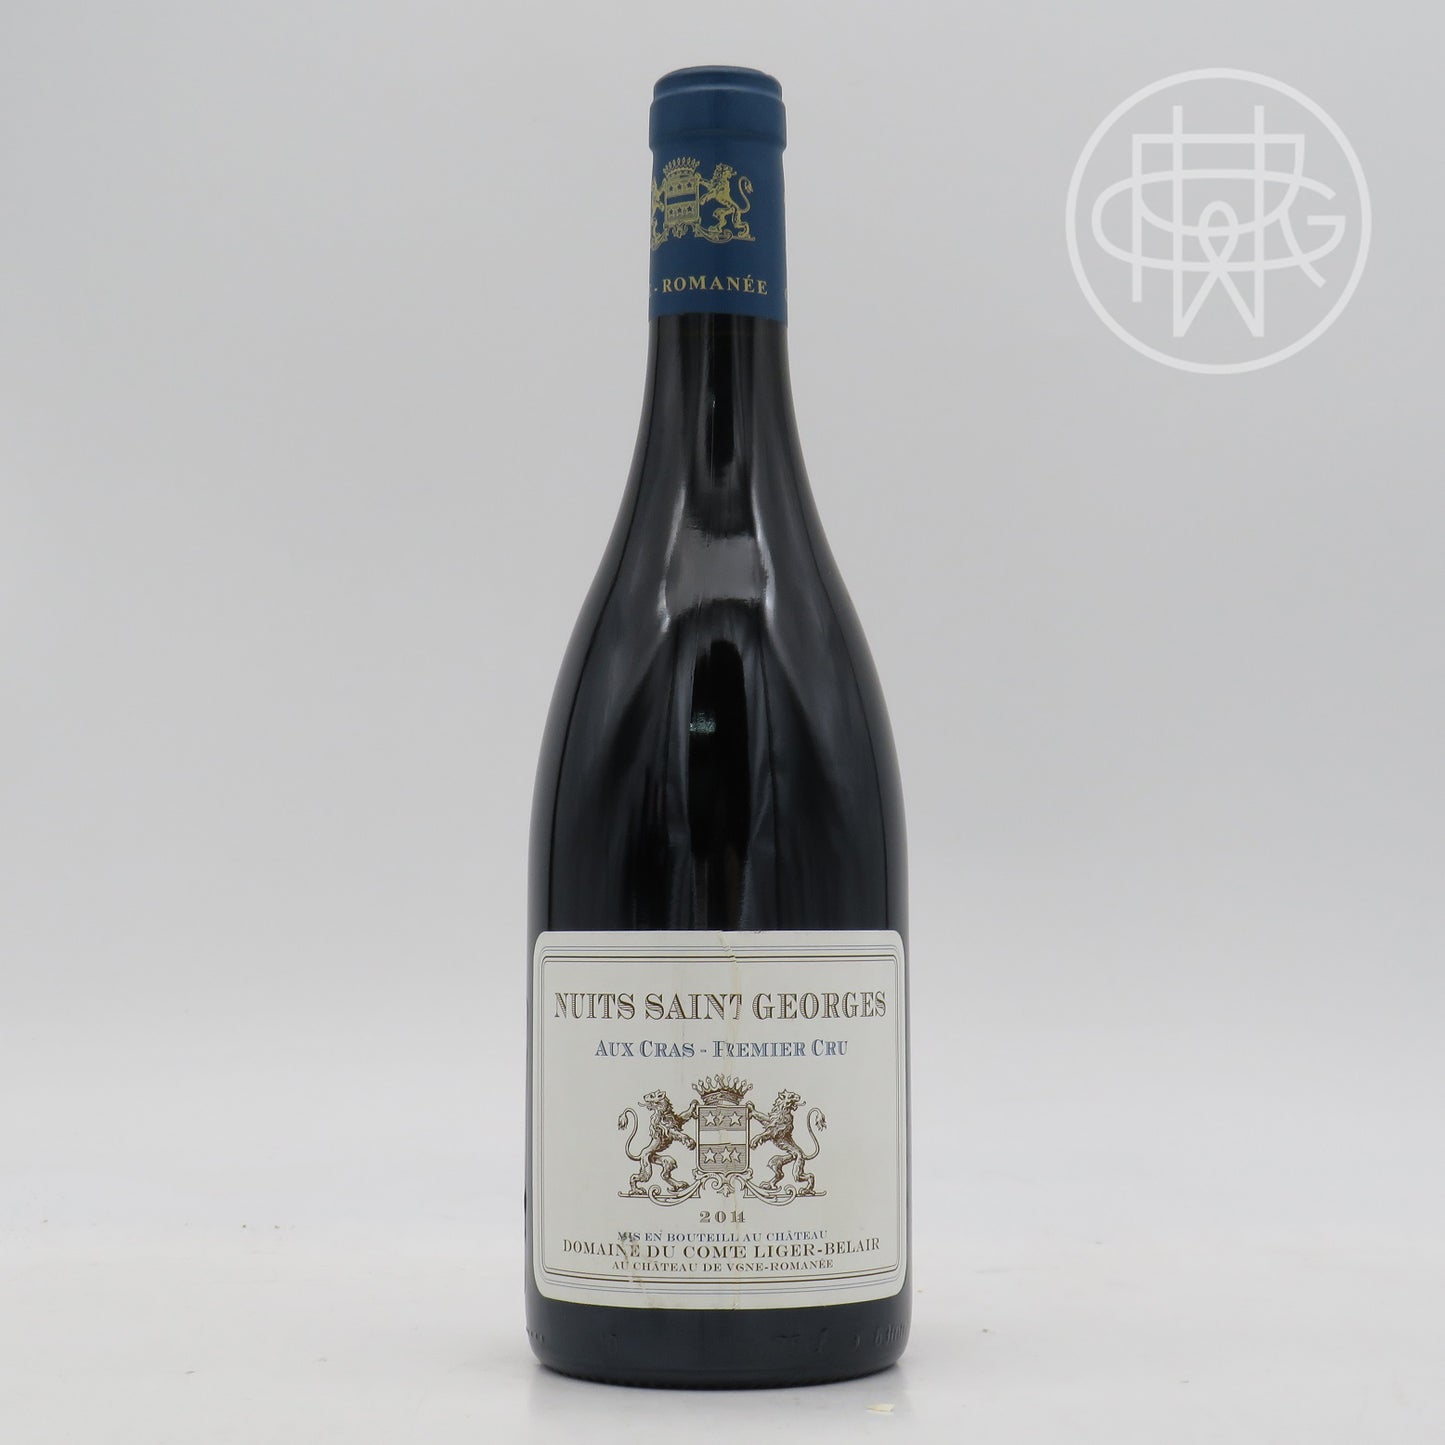 Liger Belair Nuits St. Georges Aux Cras 2014 750mL (Slightly Scuffed Label)